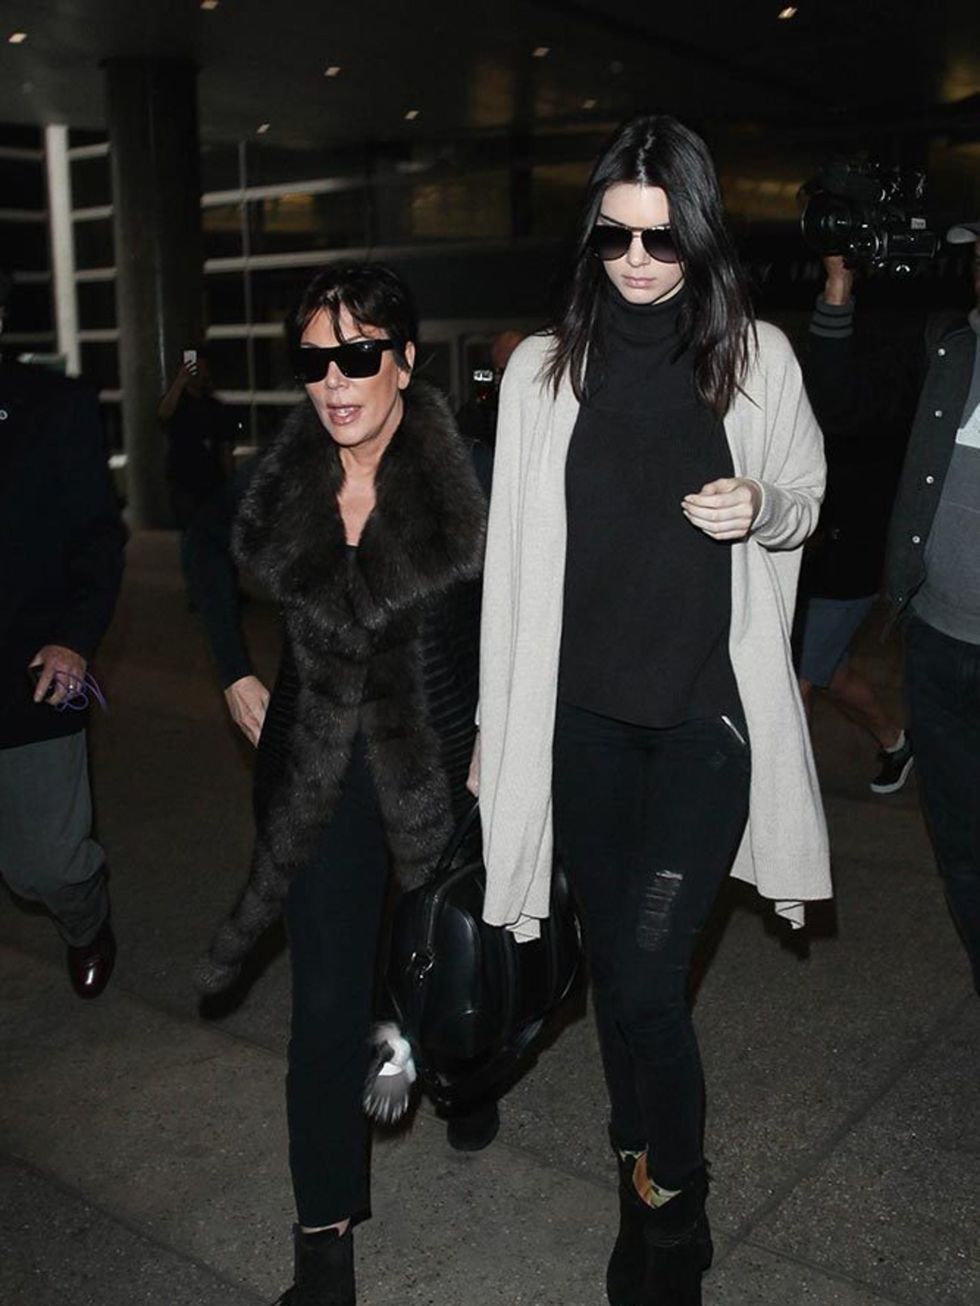 Kendall arrives at LAX with Kris Jenner. And just like that #KendallWatchAW15 is over. See you next season...